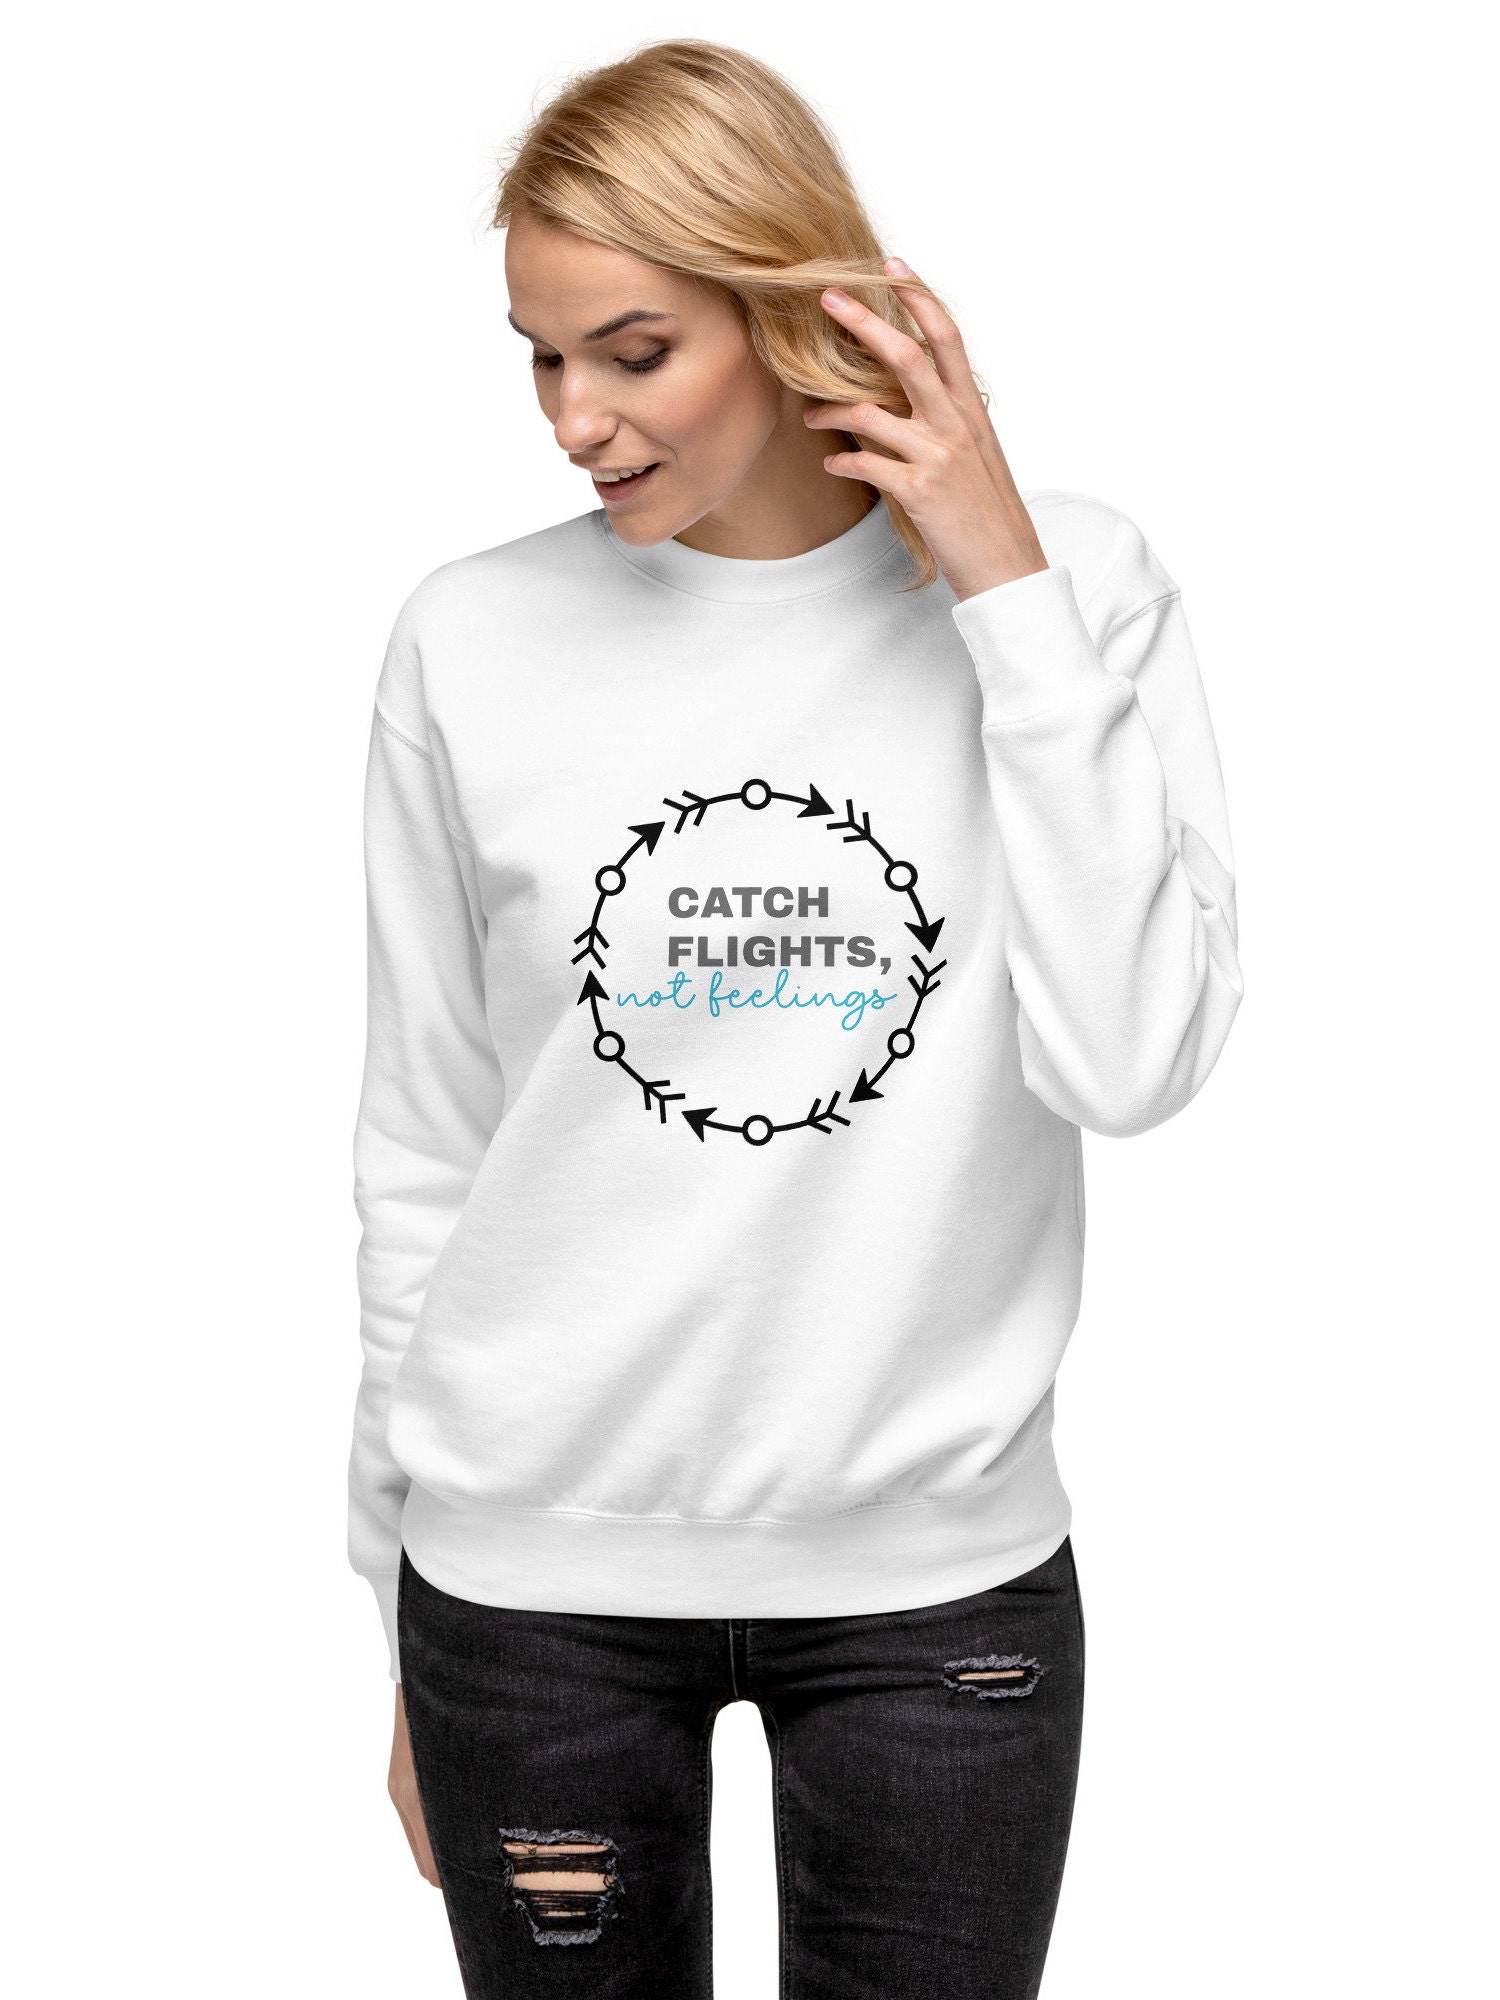 Things Are Not Gloughing Exactly To Plane Shirt, hoodie, sweater, long  sleeve and tank top